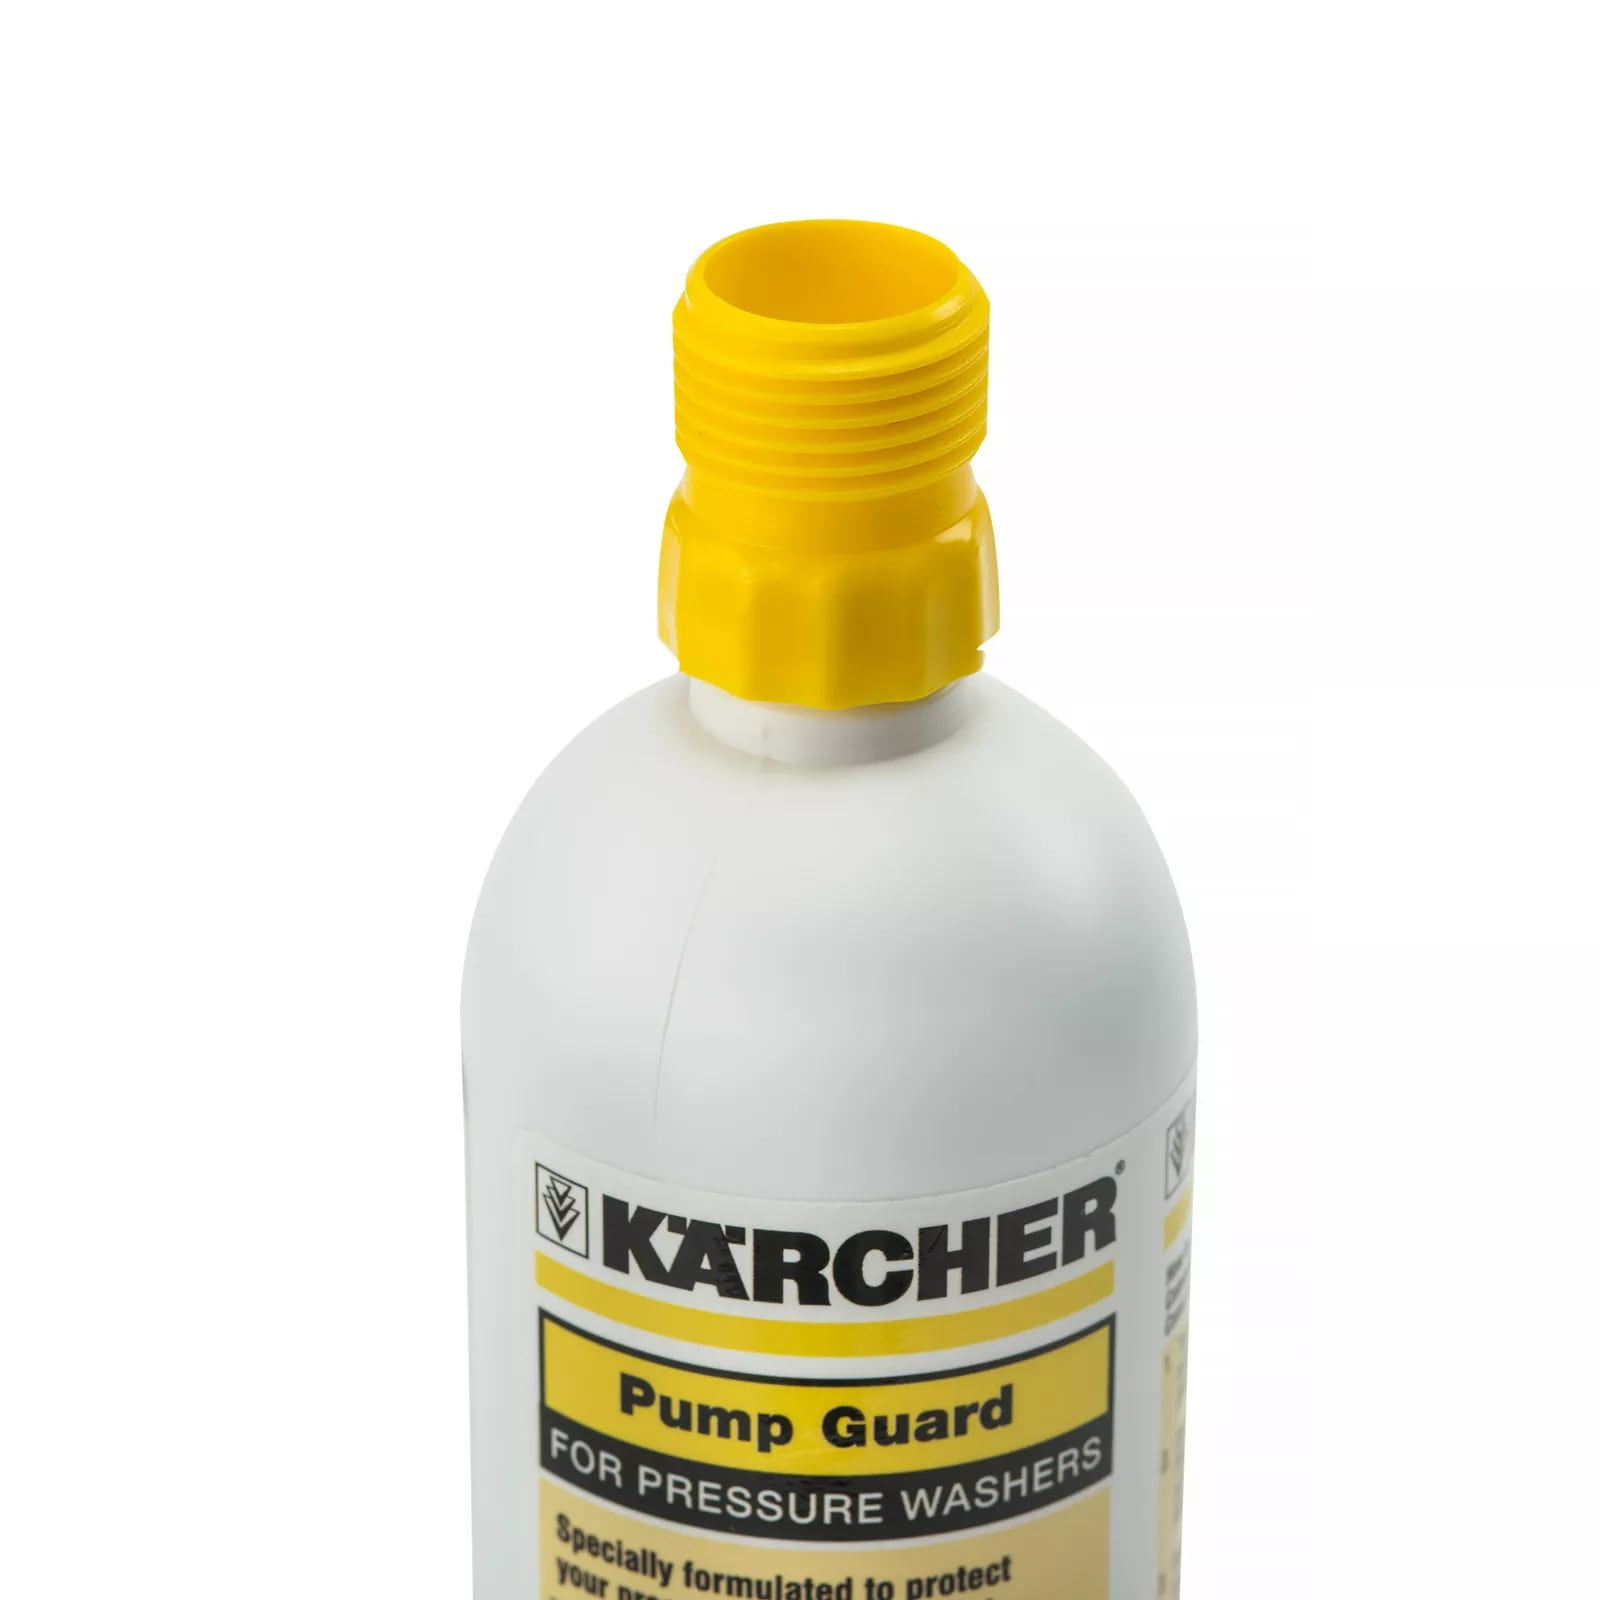 Karcher Induction Cooktop Mat Protector Nonslip Silicone Heat